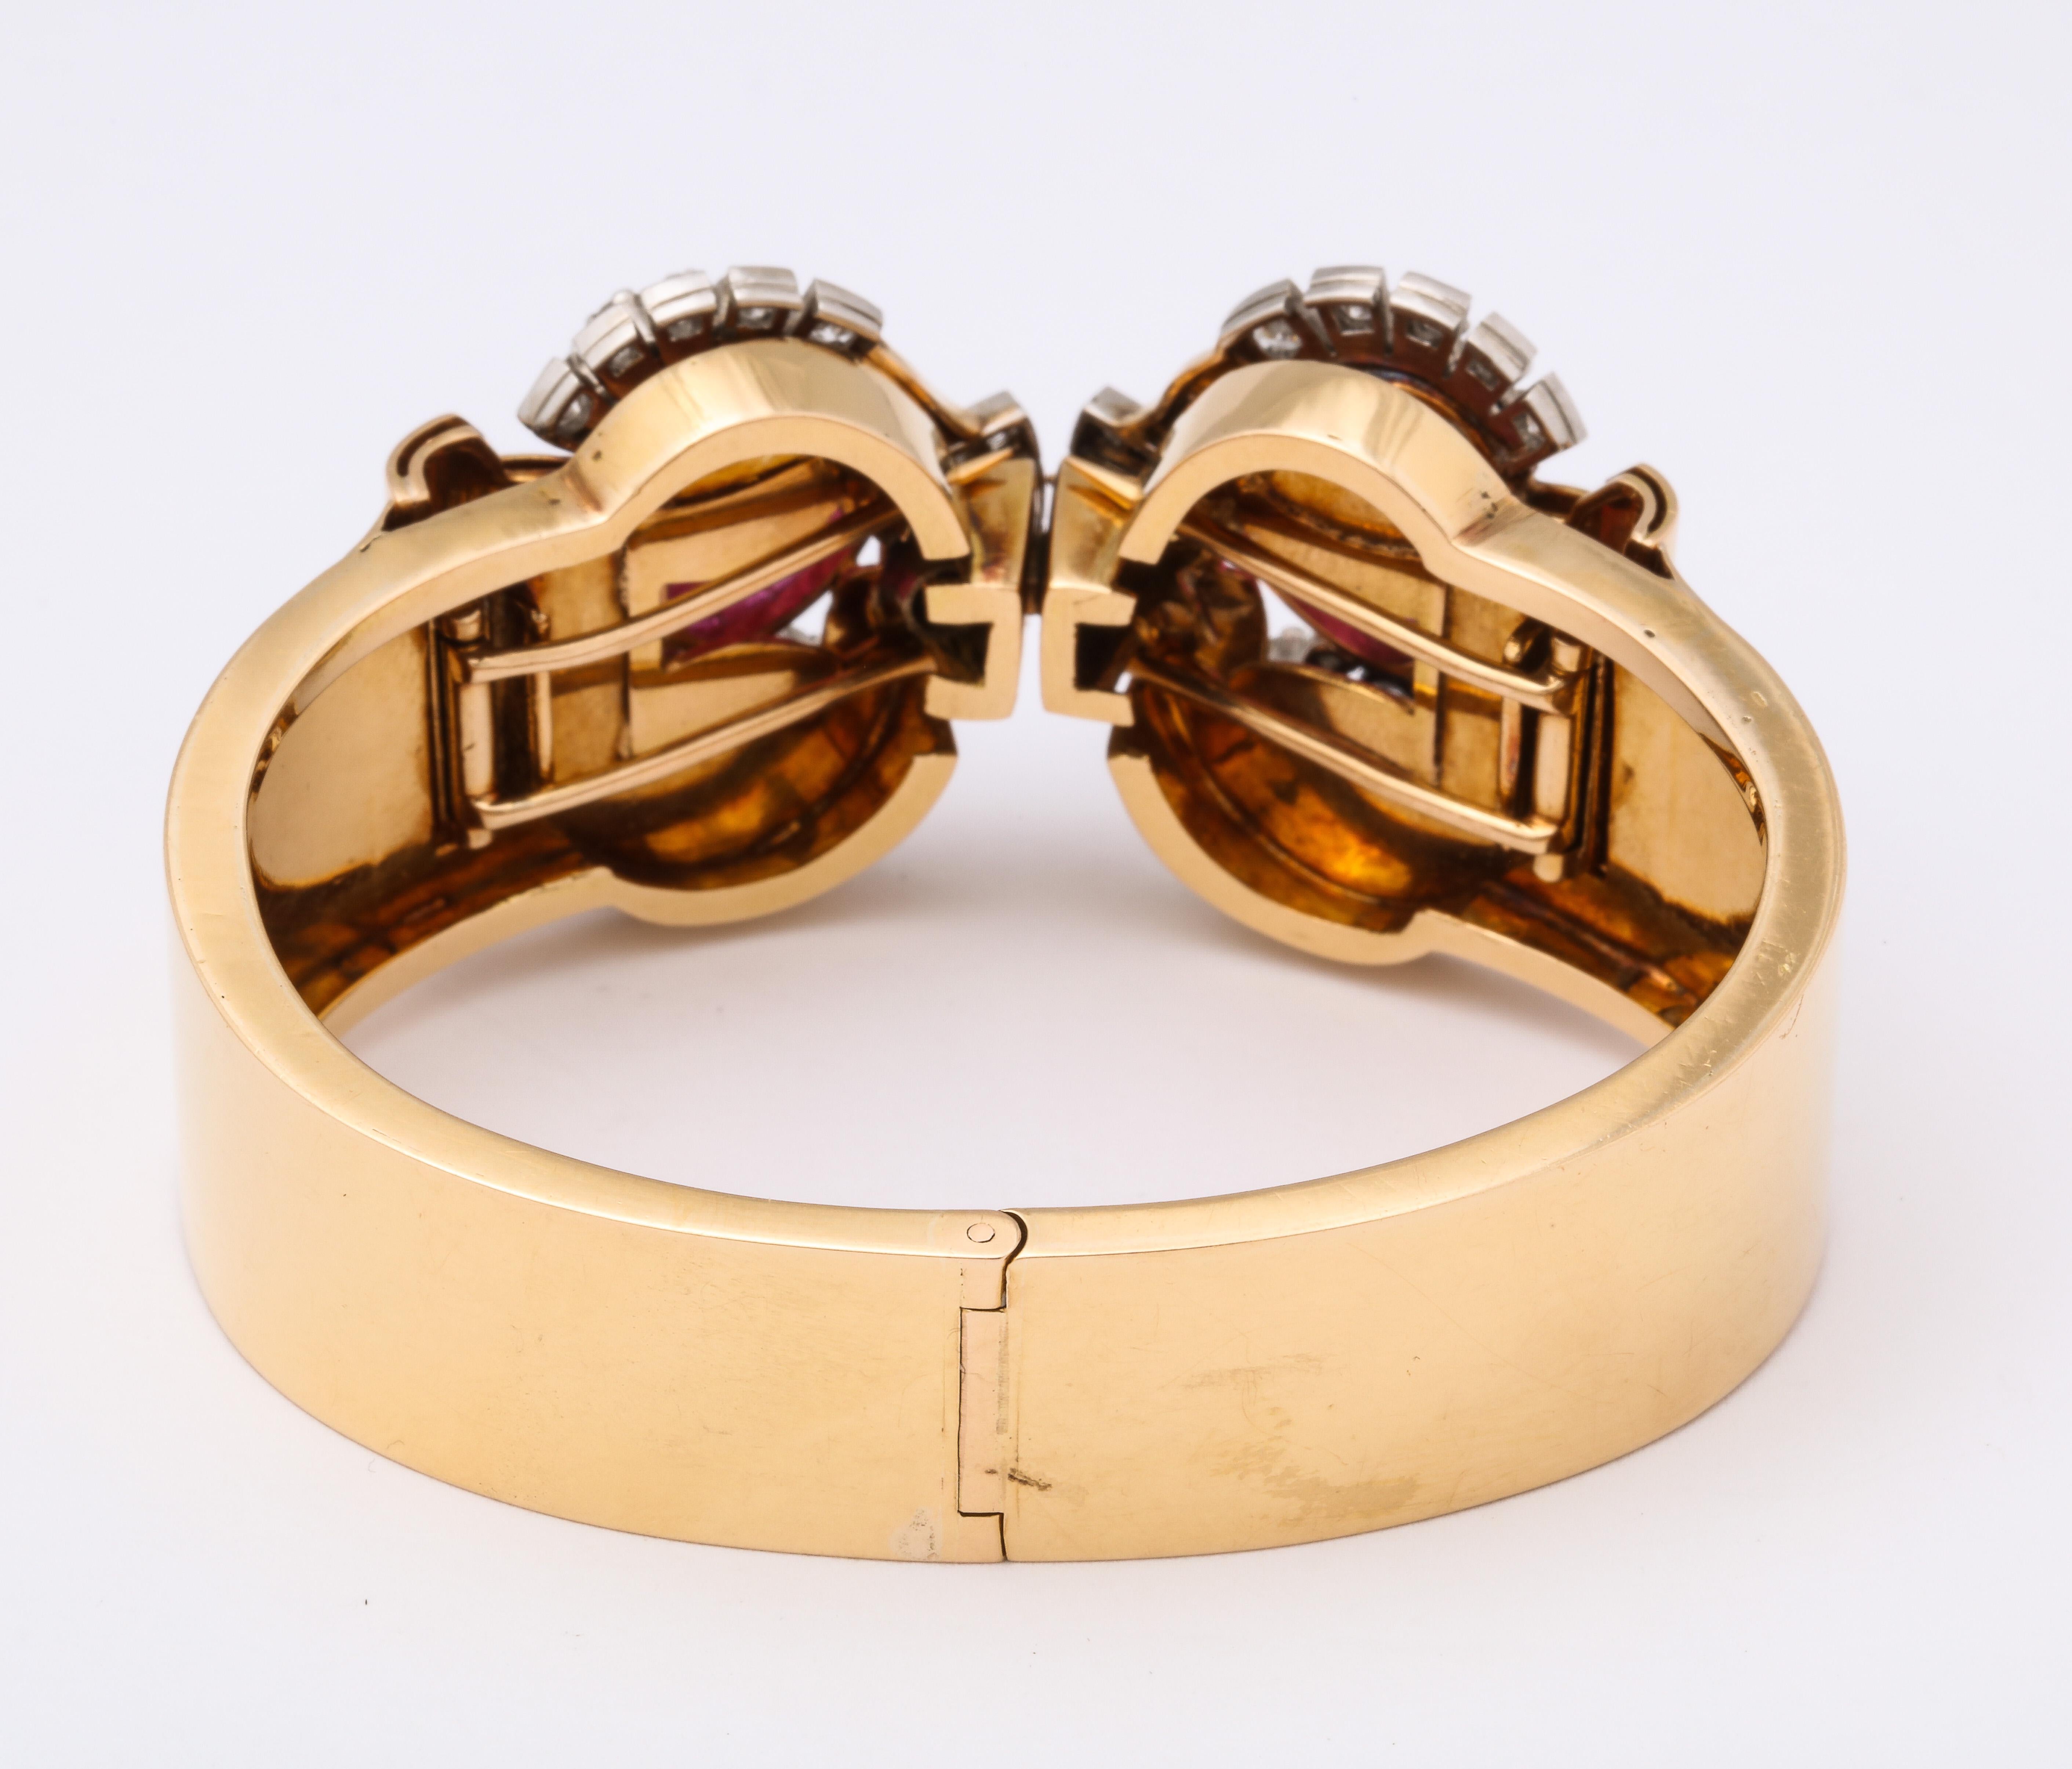 A retro hinged bangle bracelet, circa 1970, in 18k Yellow Gold, unmarked but tested.  84 full cut diamonds weigh approximately 2 carats.  Two carved ruby leaves weighing approximately 1.5 carats. The two fur clips come off to be worn as pins.  For a